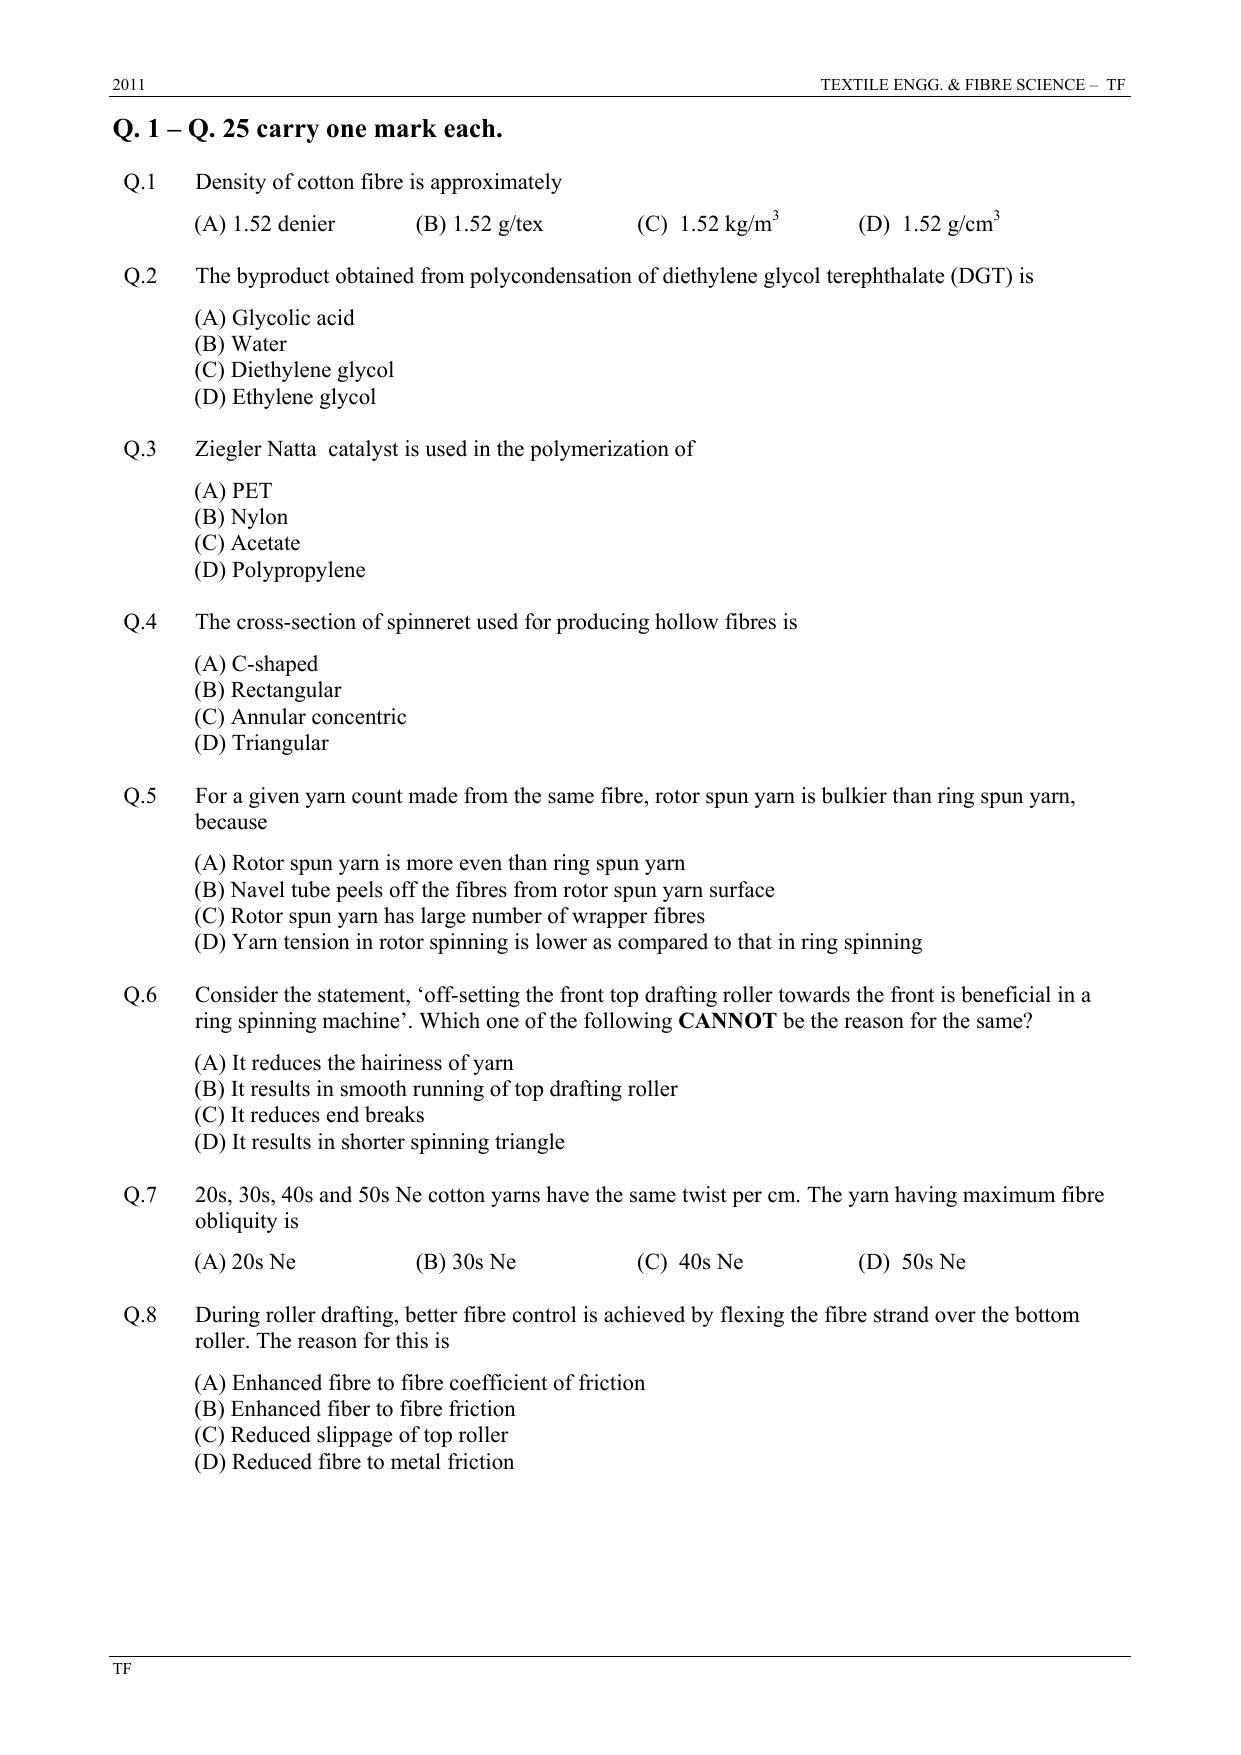 GATE 2011 Textile Engineering and Fibre Science (TF) Question Paper with Answer Key - Page 2